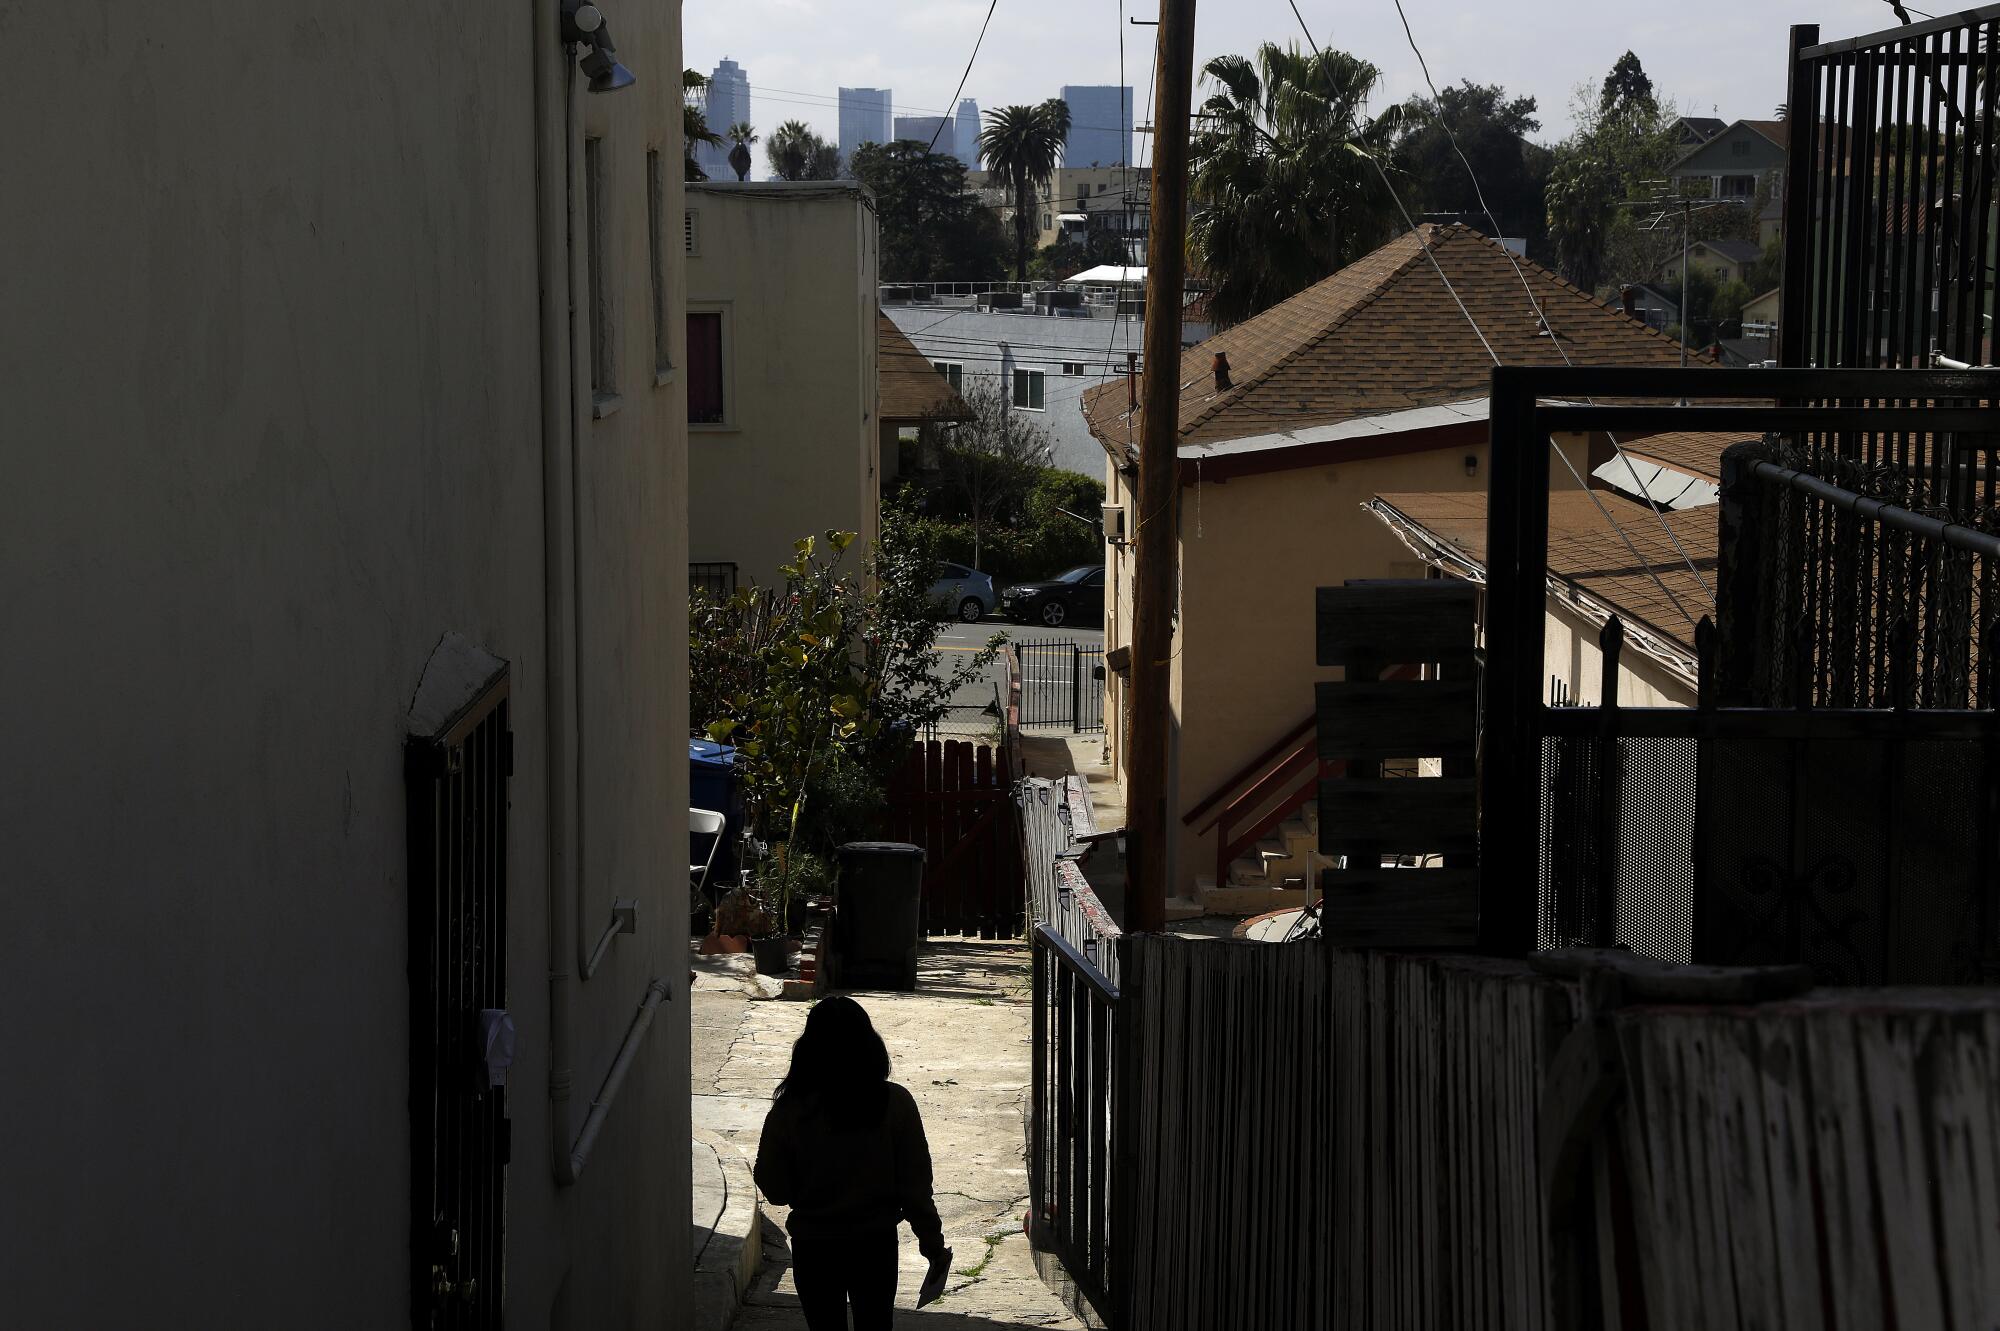 A person walks next to an apartment complex with a view of downtown L.A. in the distance. 